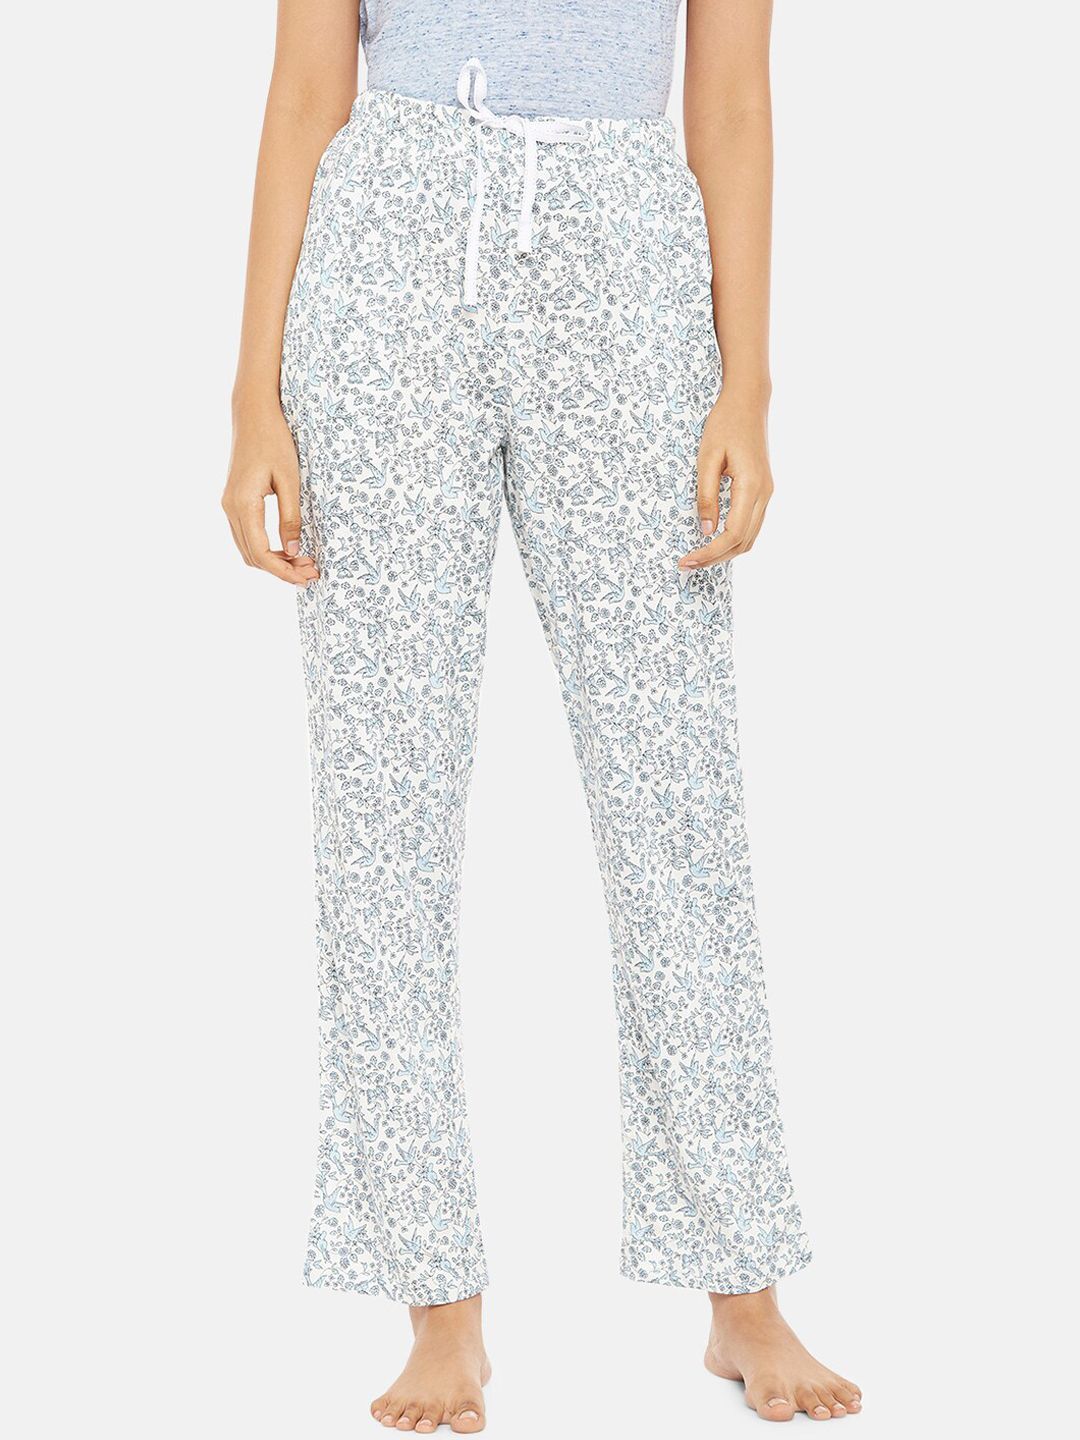 Dreamz by Pantaloons Women White Printed Lounge Pants Price in India